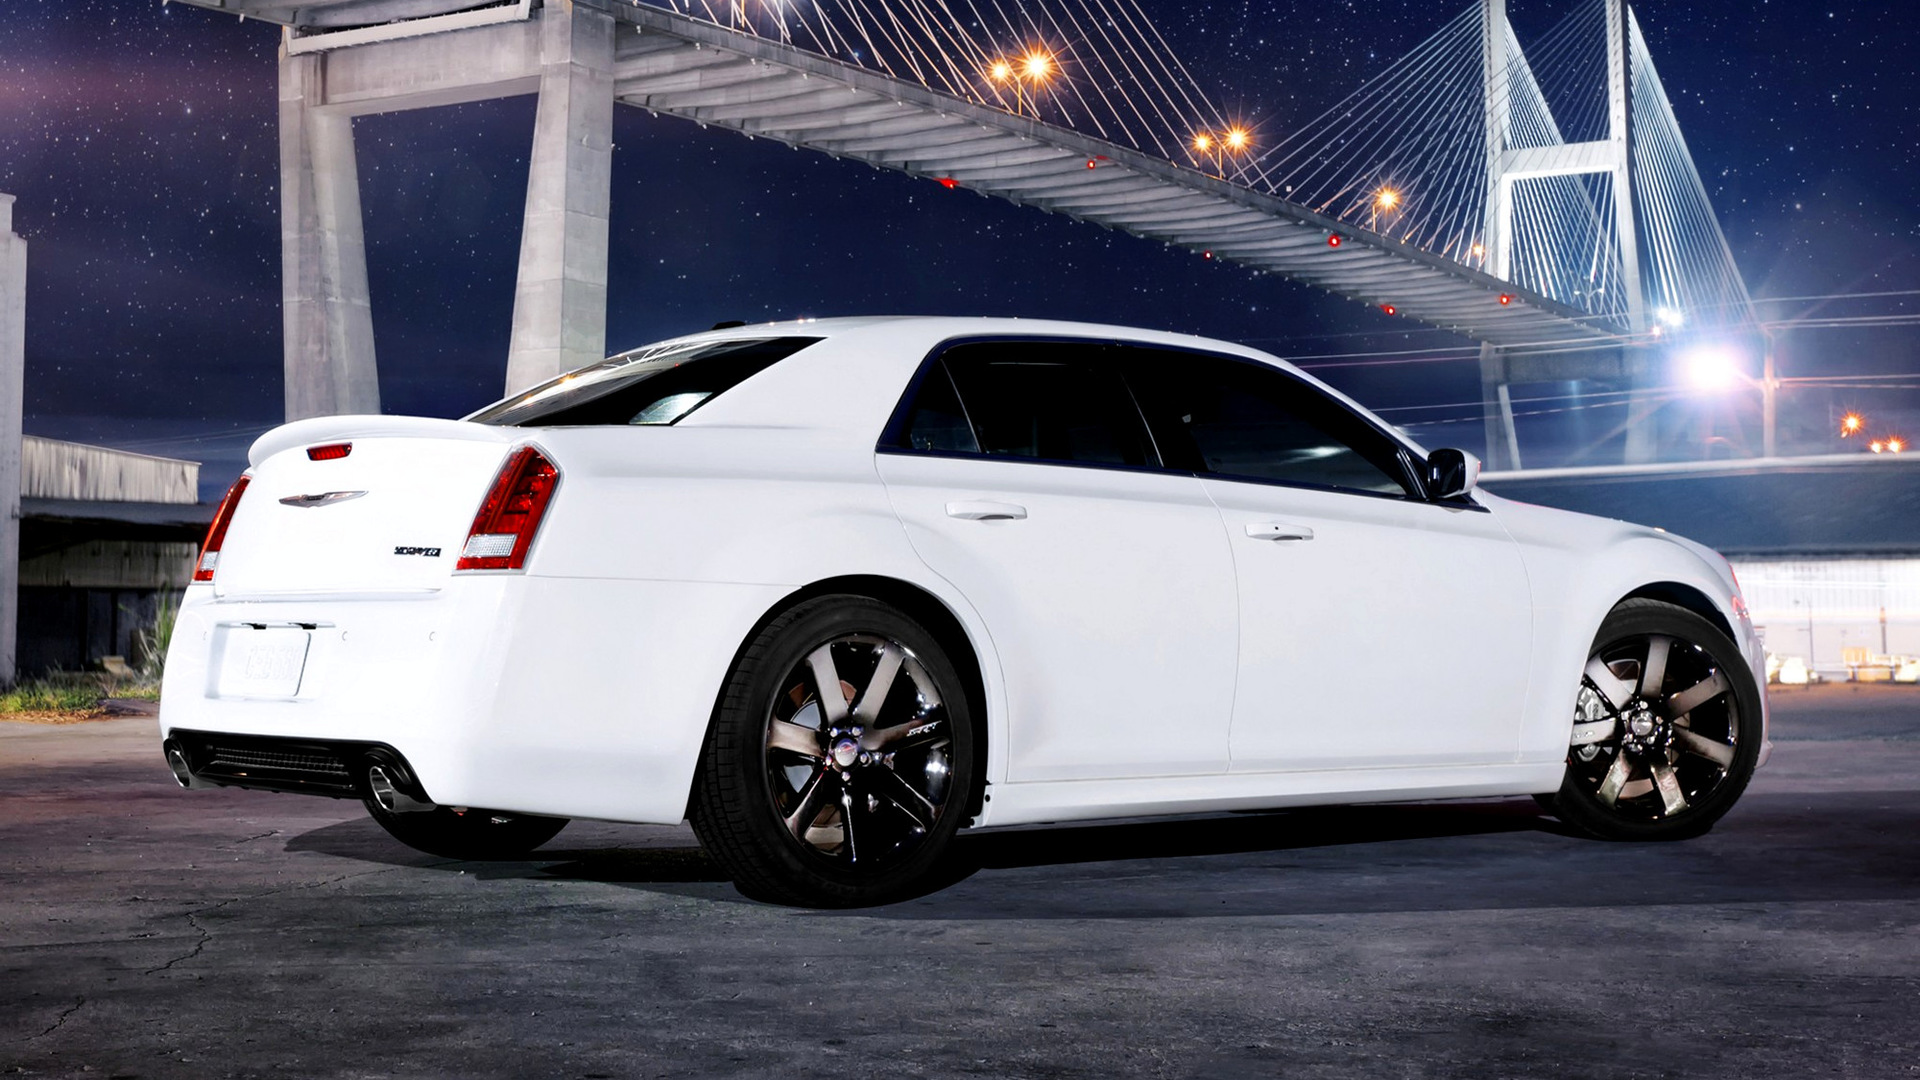 Chrysler 300 SRT8 (2011) Wallpapers and HD Images